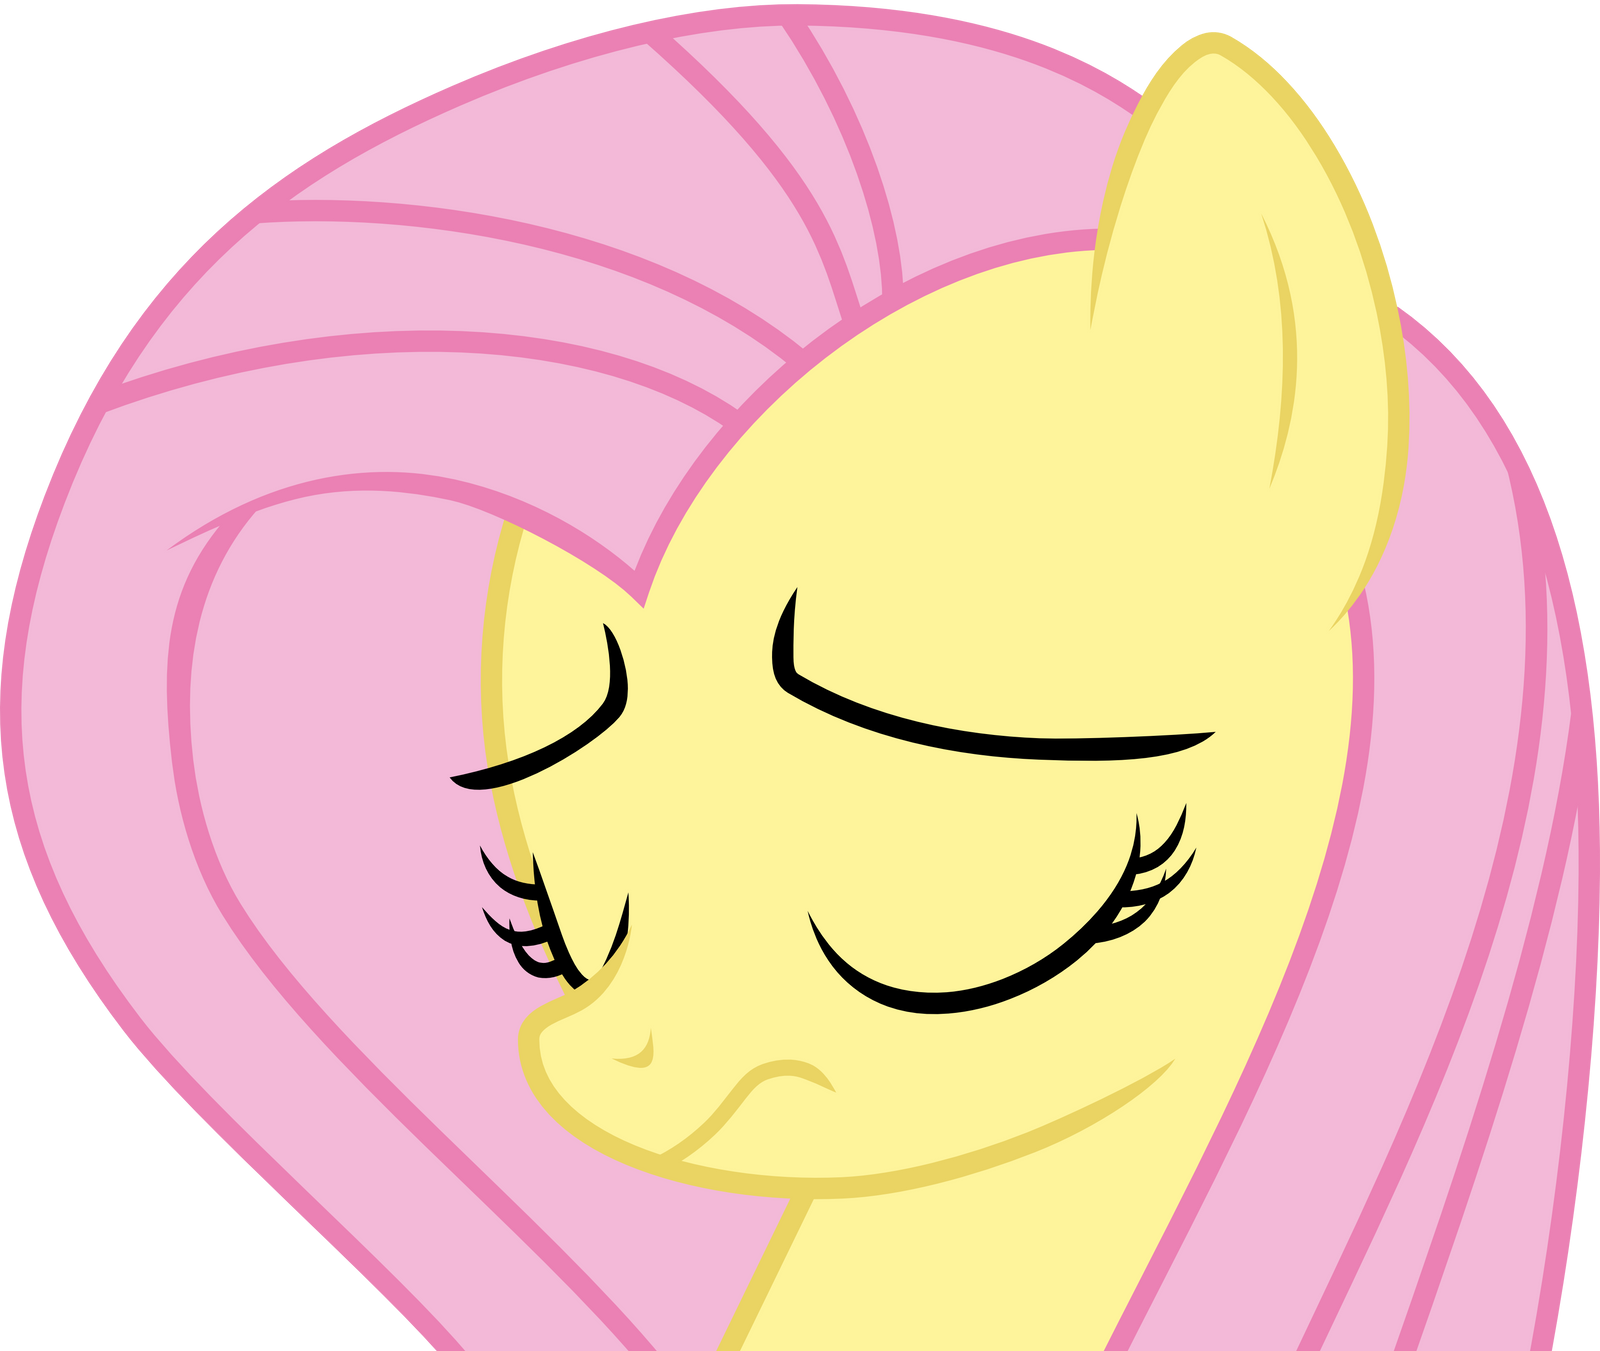 fluttershy_sad_by_uponia-d9x7ml2.png